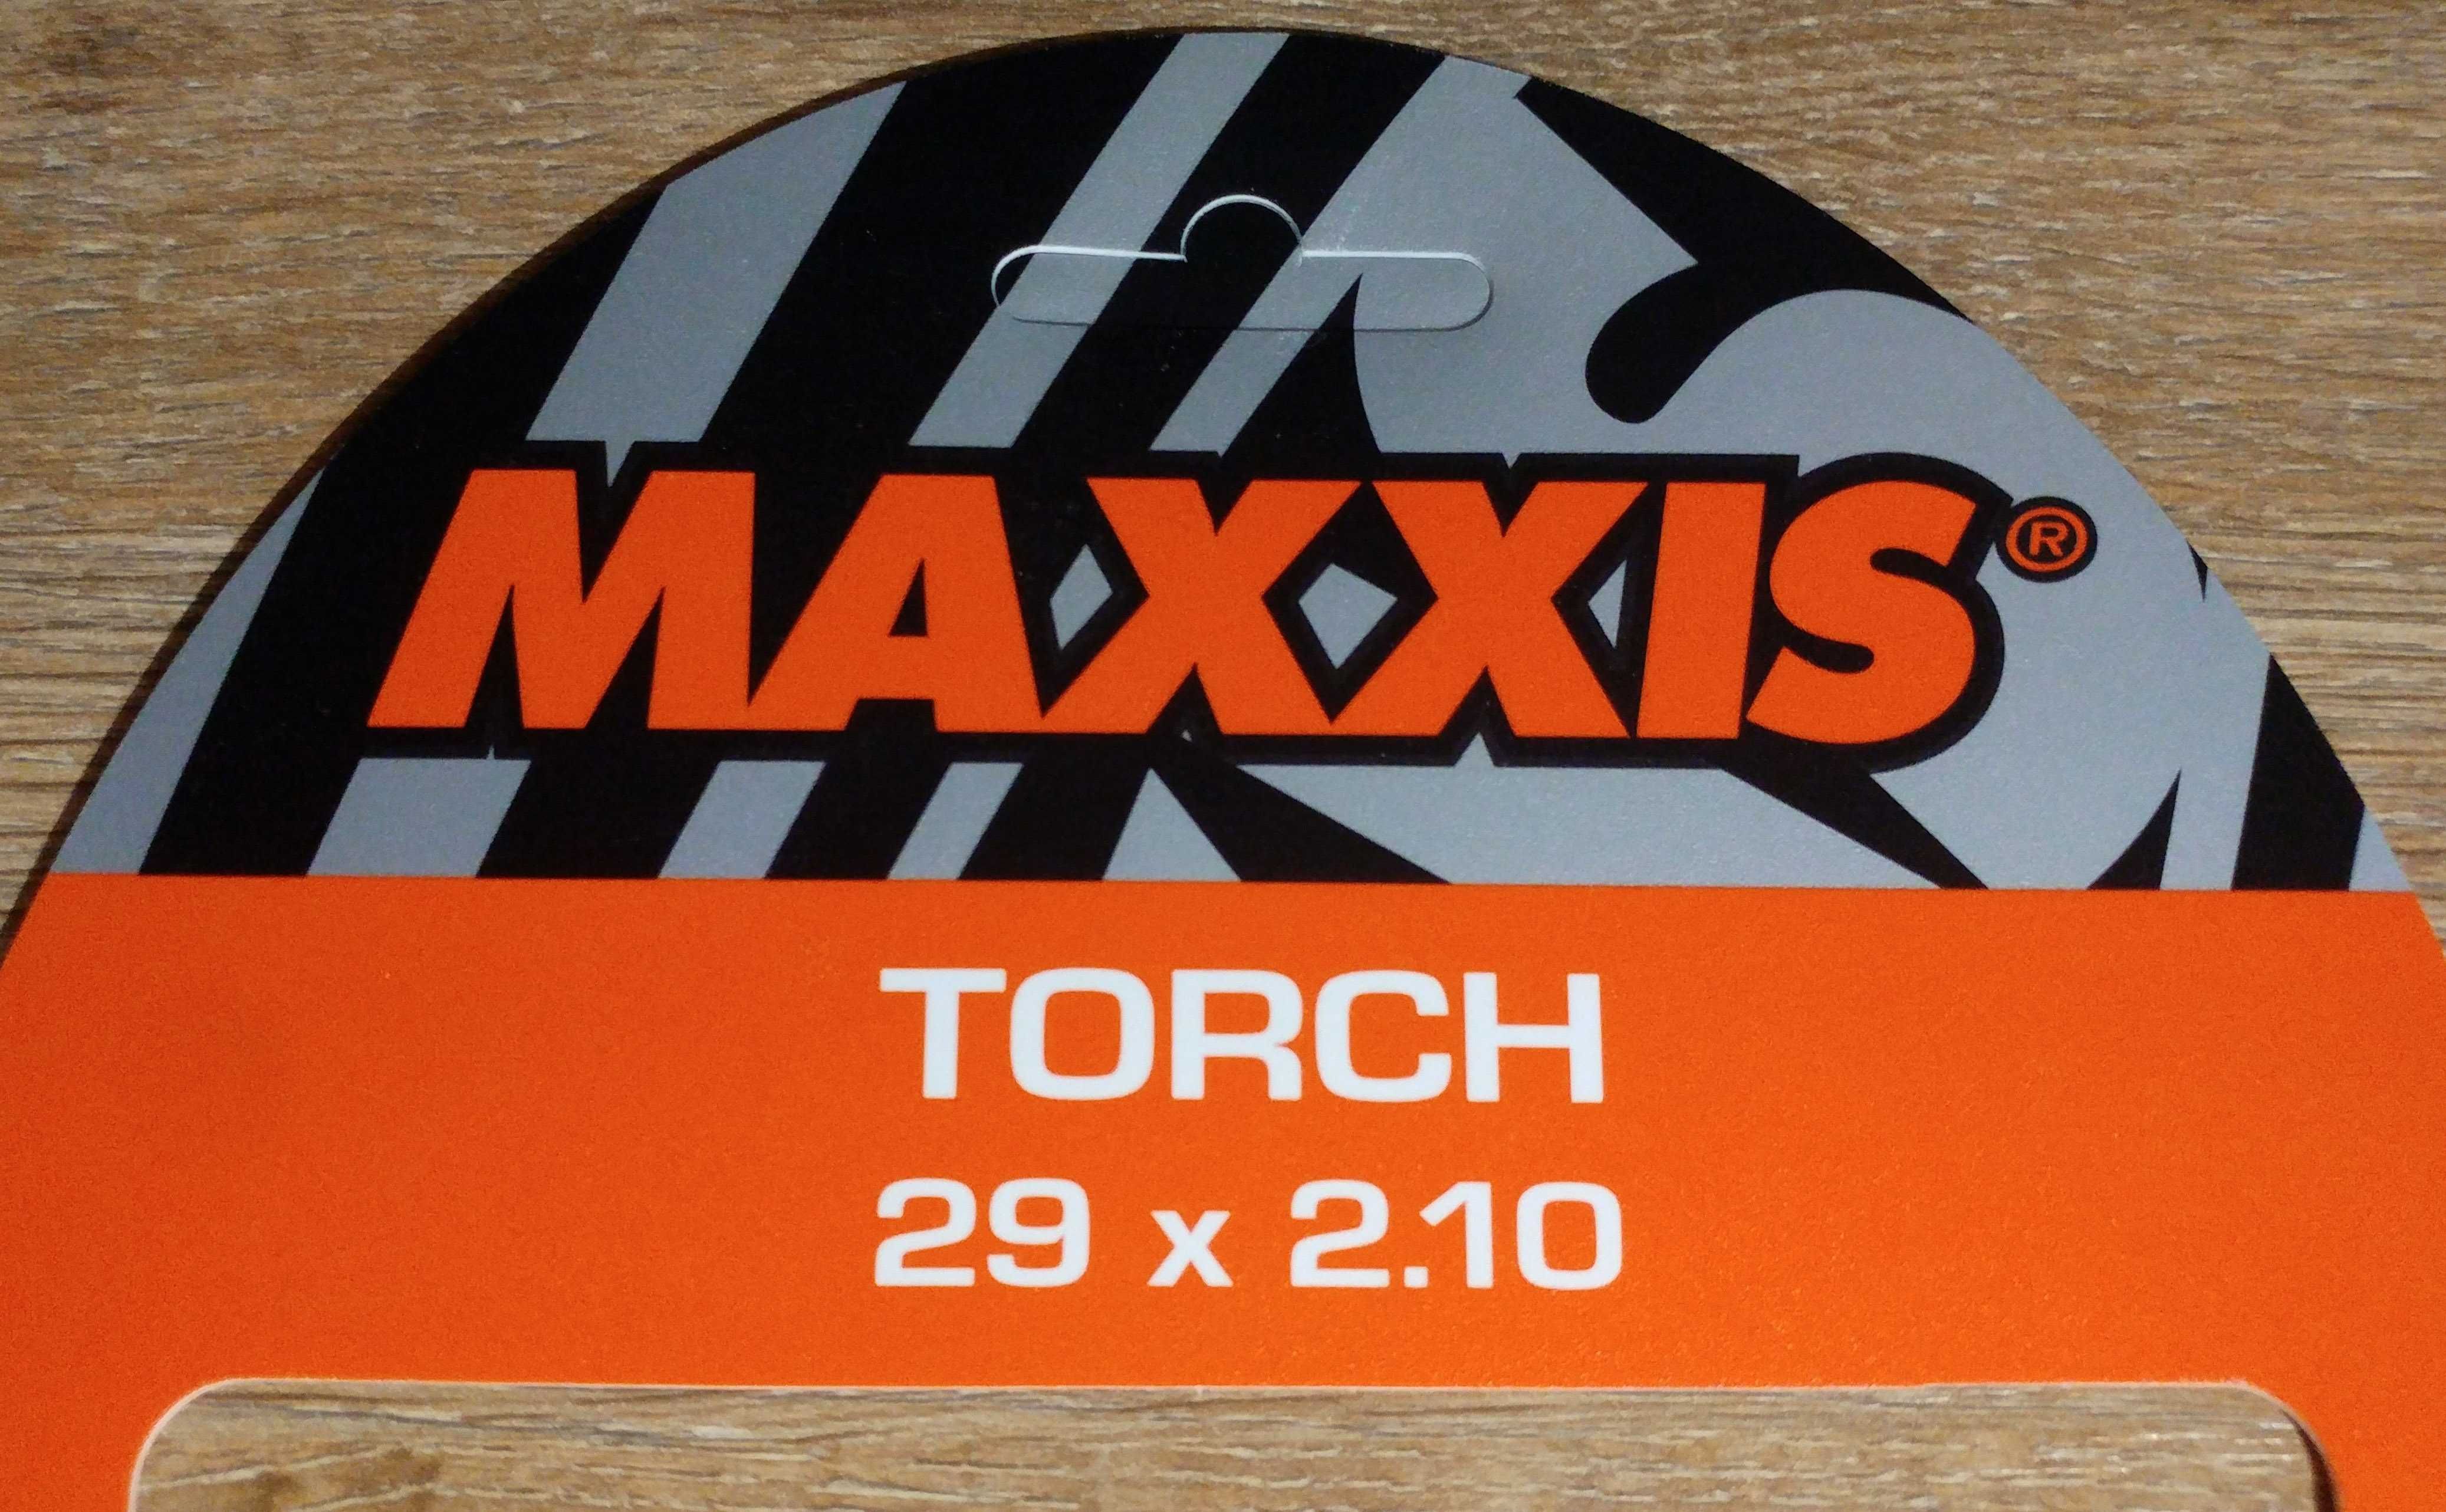 Велопокрышки, MAXXIS Torch 29x2,10.